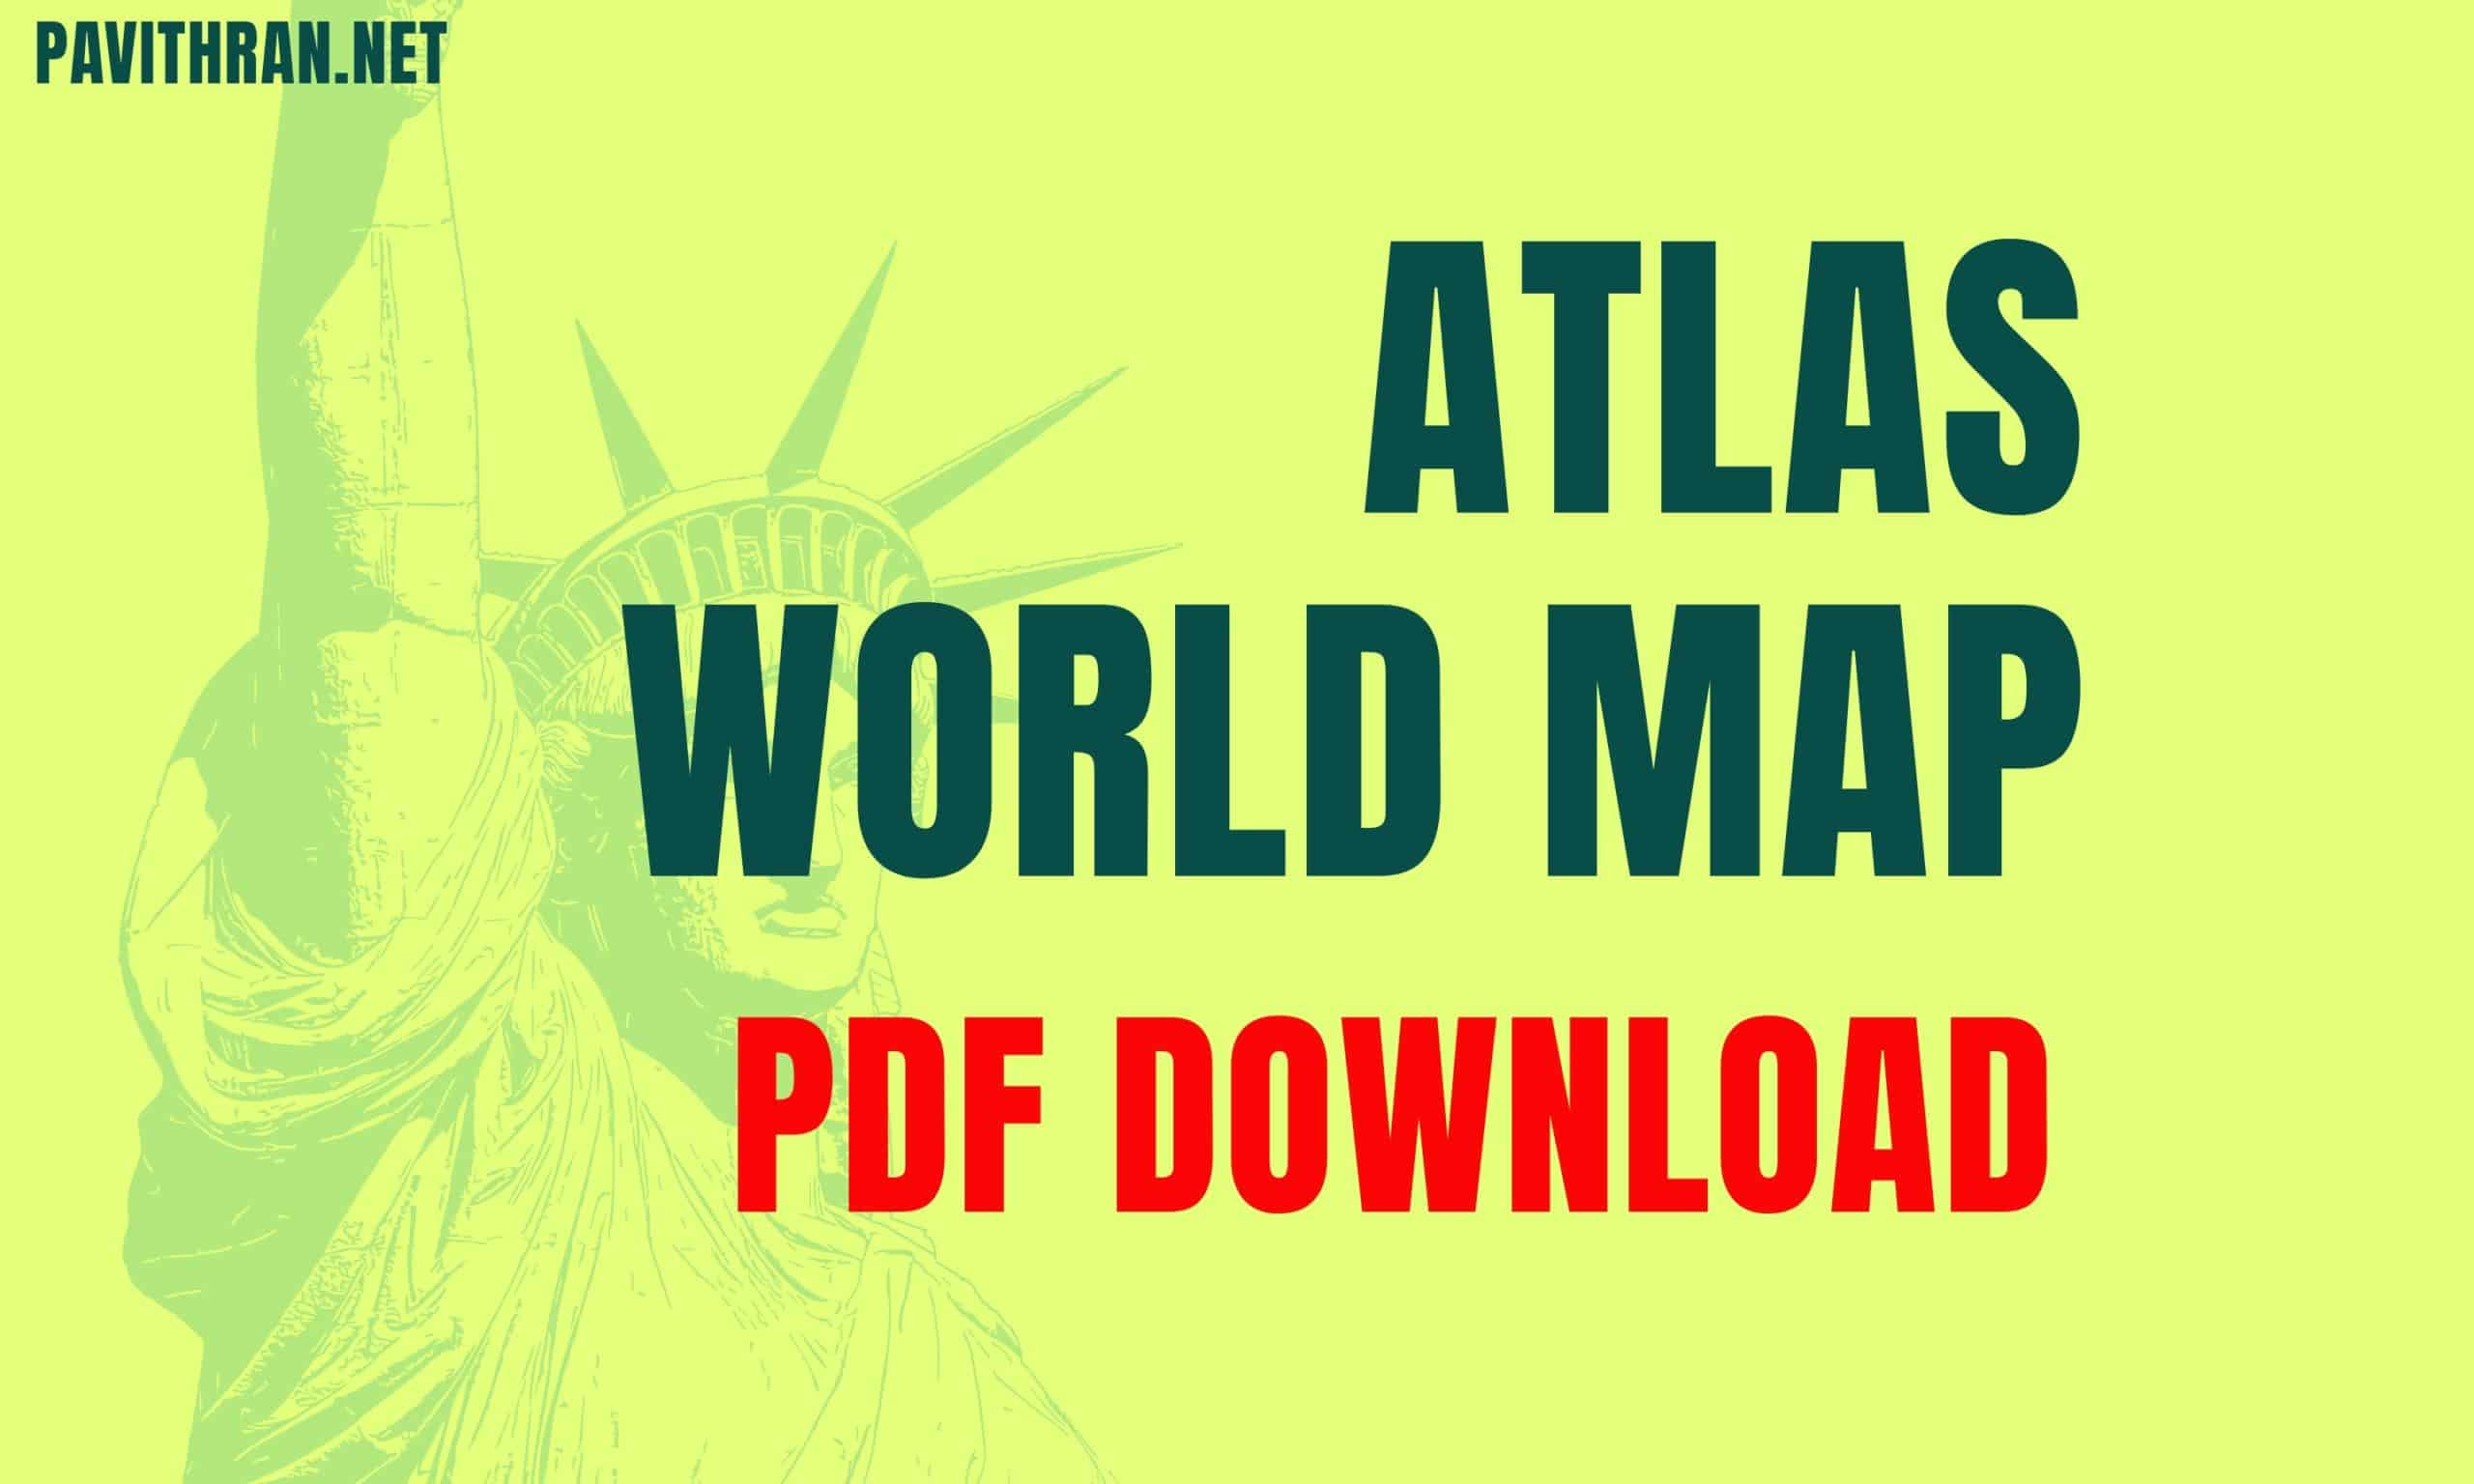 The world as it is pdf free download for windows 7